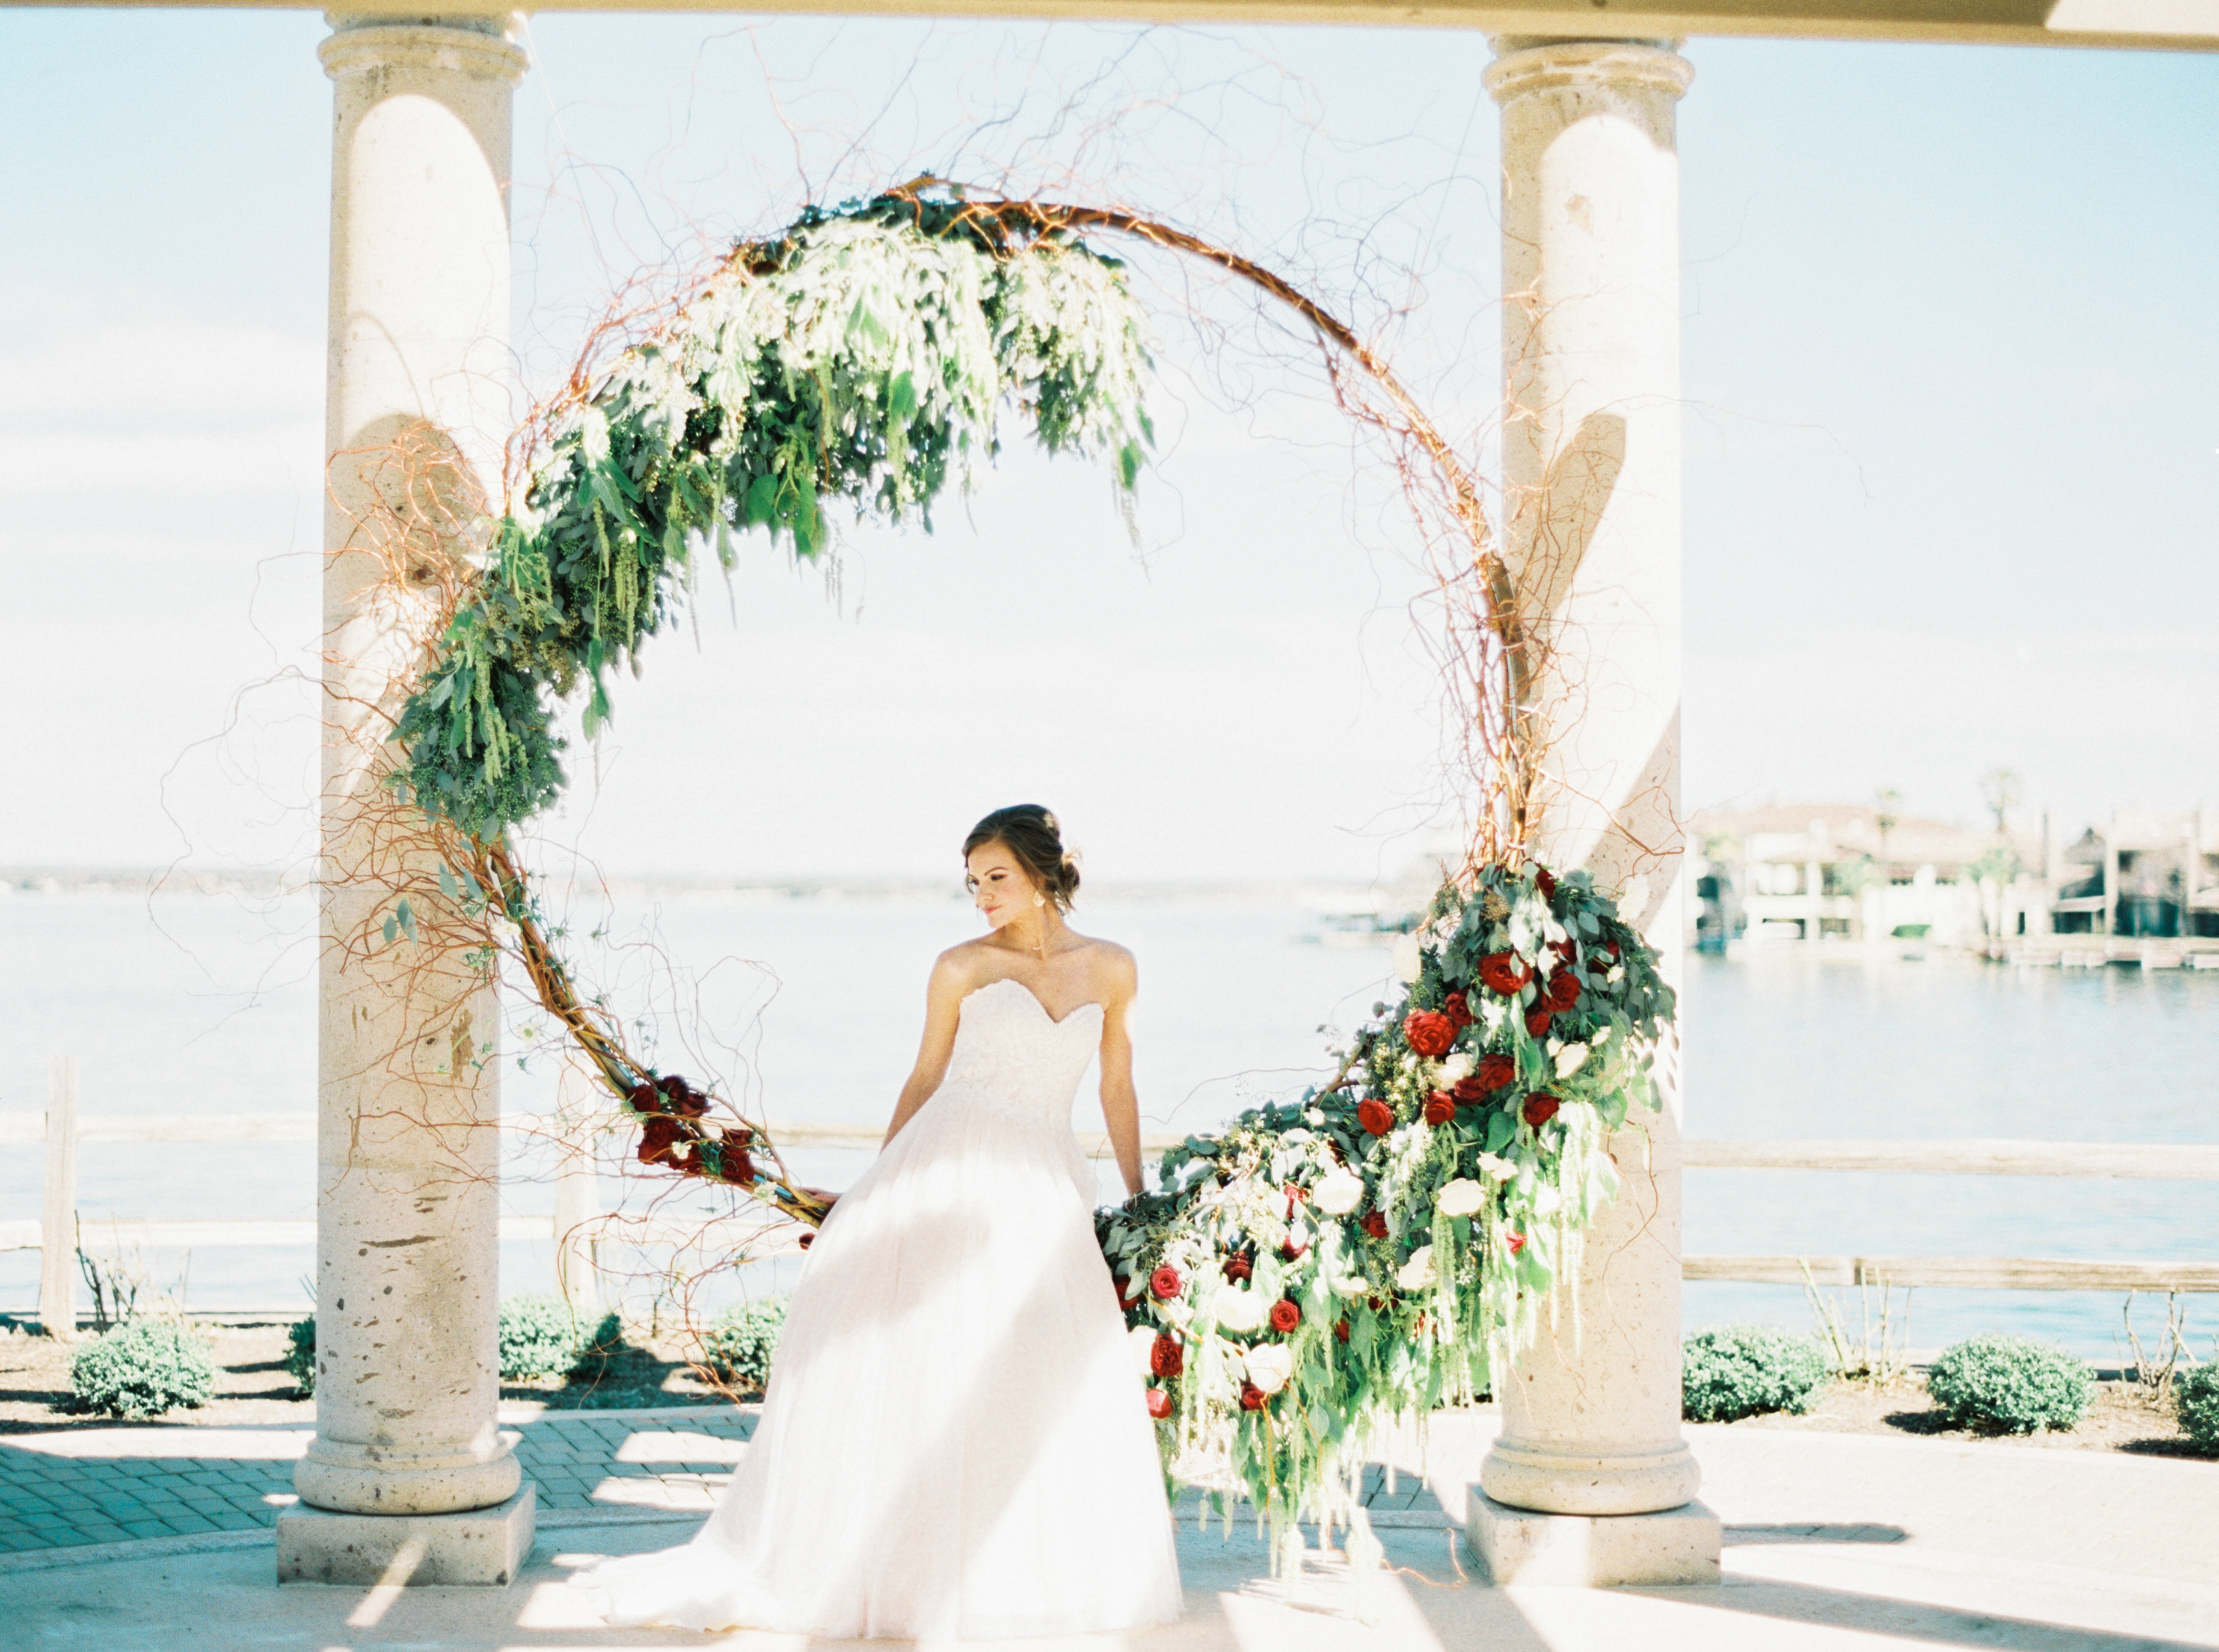 View More: http://brittanyjeanphotography.pass.us/disch-events-horseshoe-bay-open-house